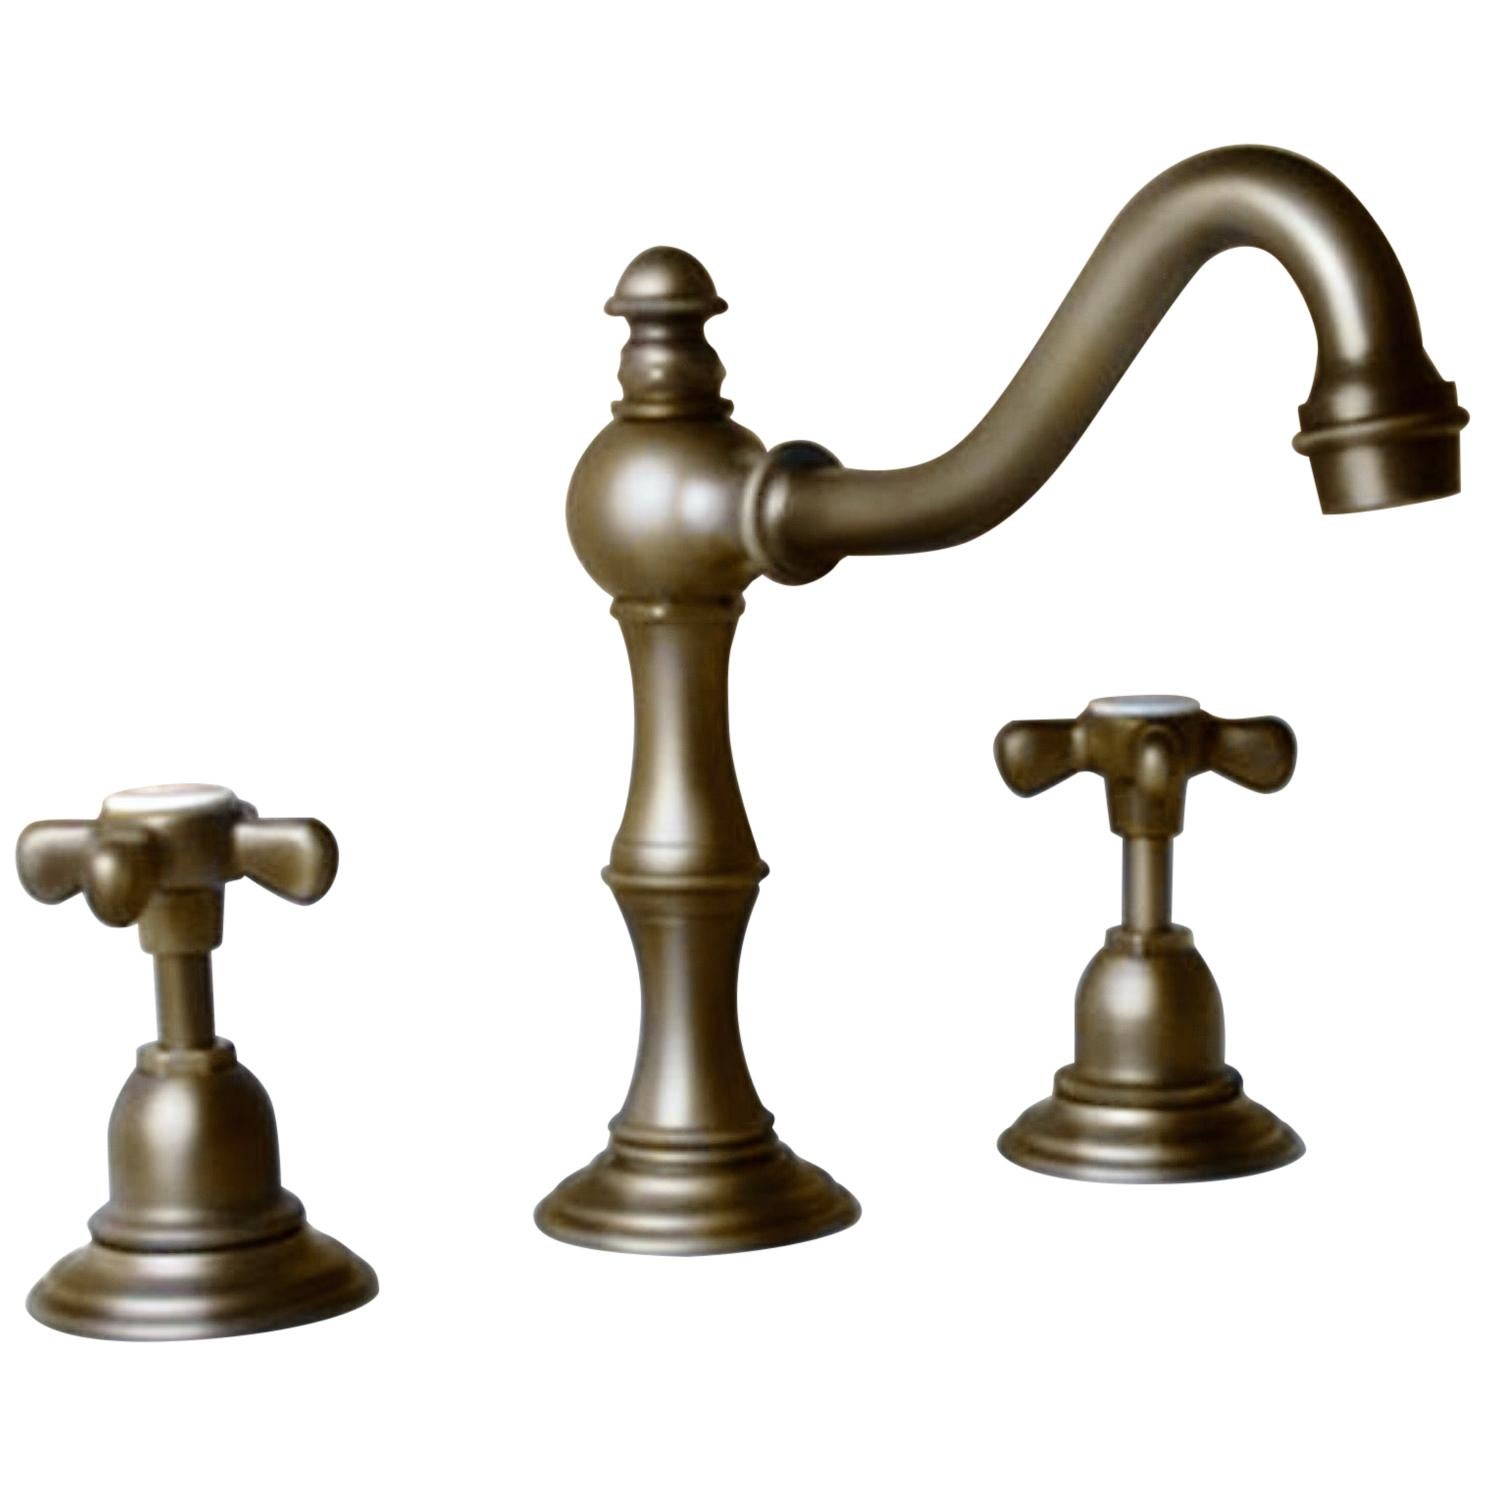 Desire Herbeau Lille France Royale Weathered Brass Widespread Lavatory Faucet  